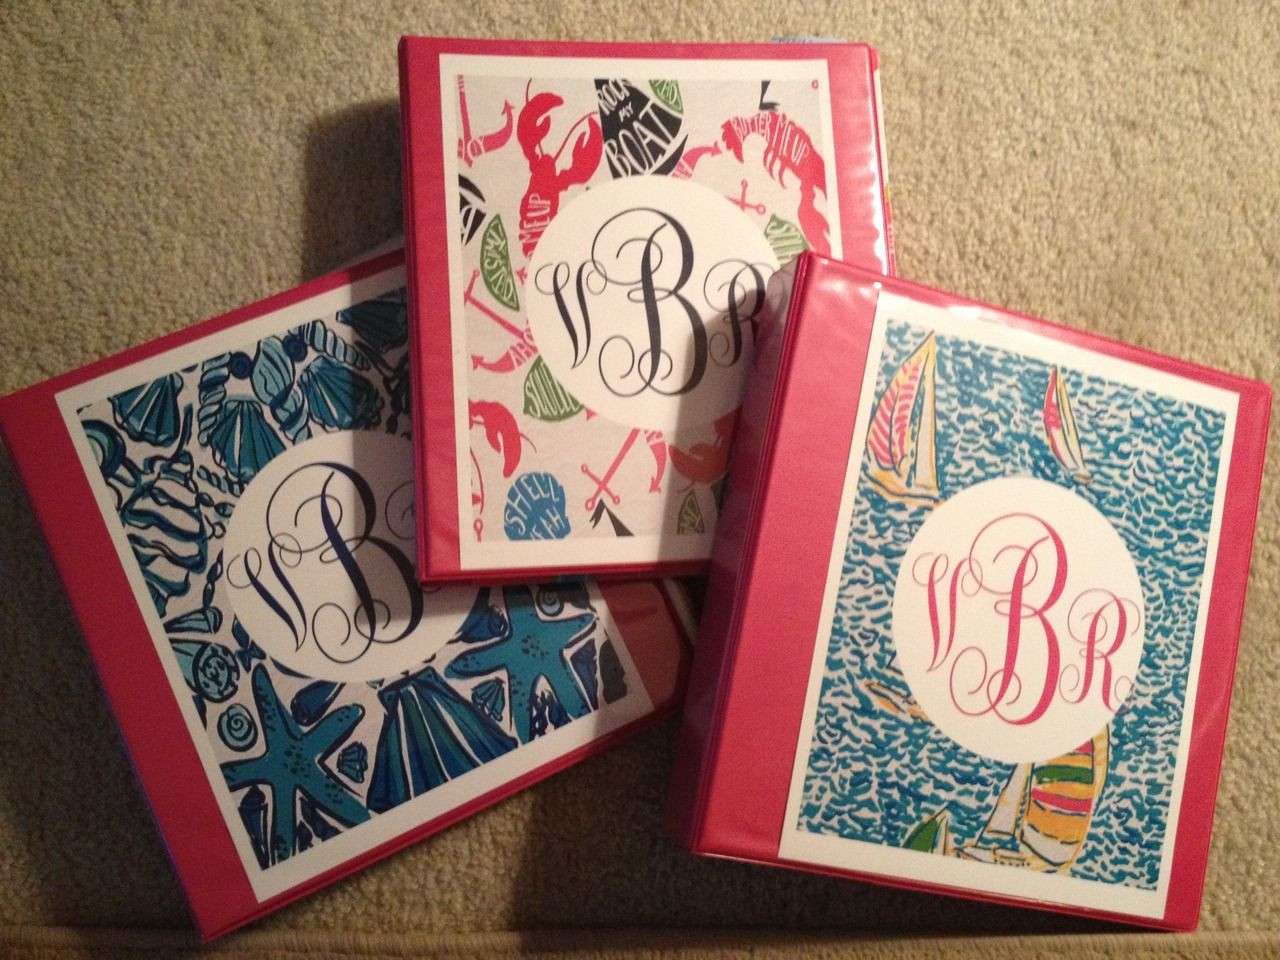 DIY Binder Decorations
 Cute ways to decorate binders by using your loved ones